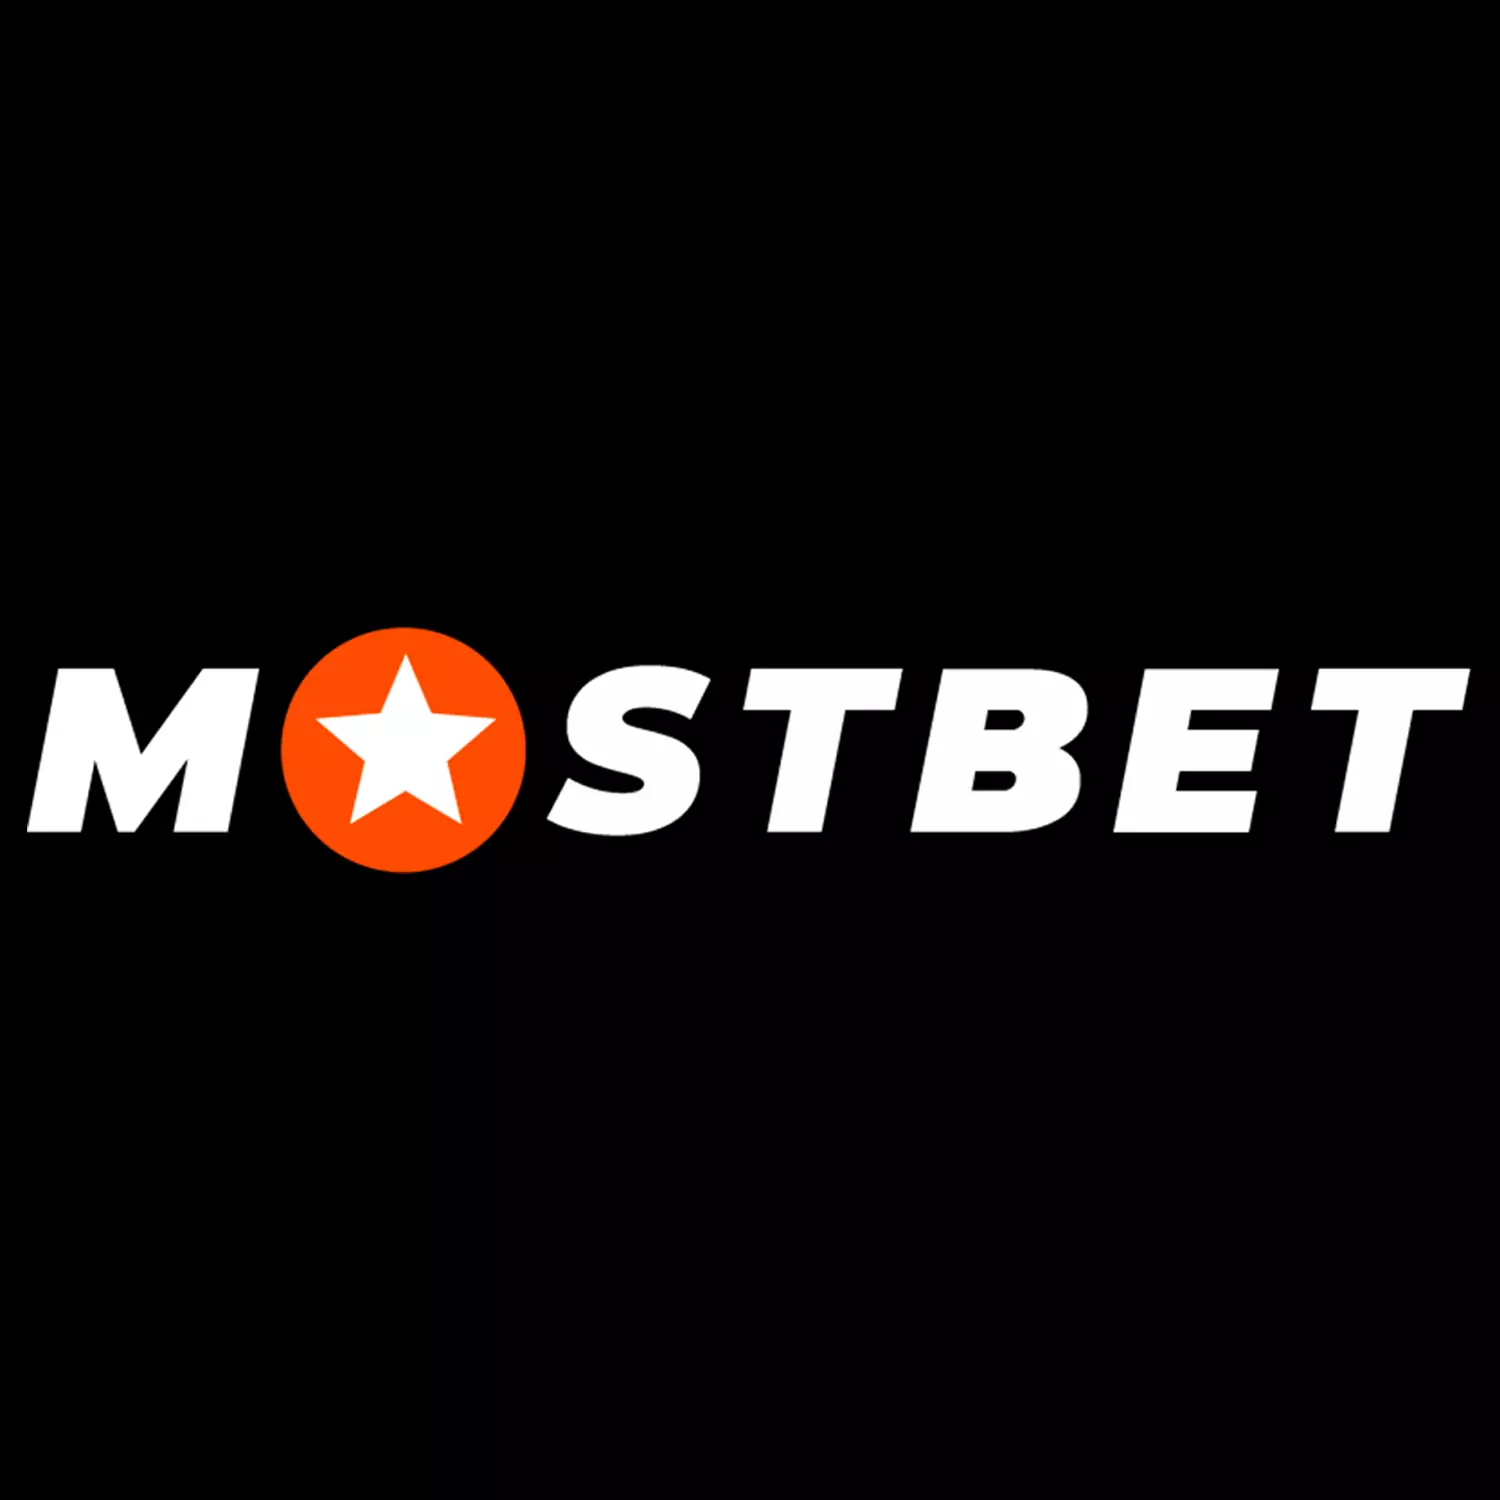 Users from Pakistan can bet on cricket at Mostbet.